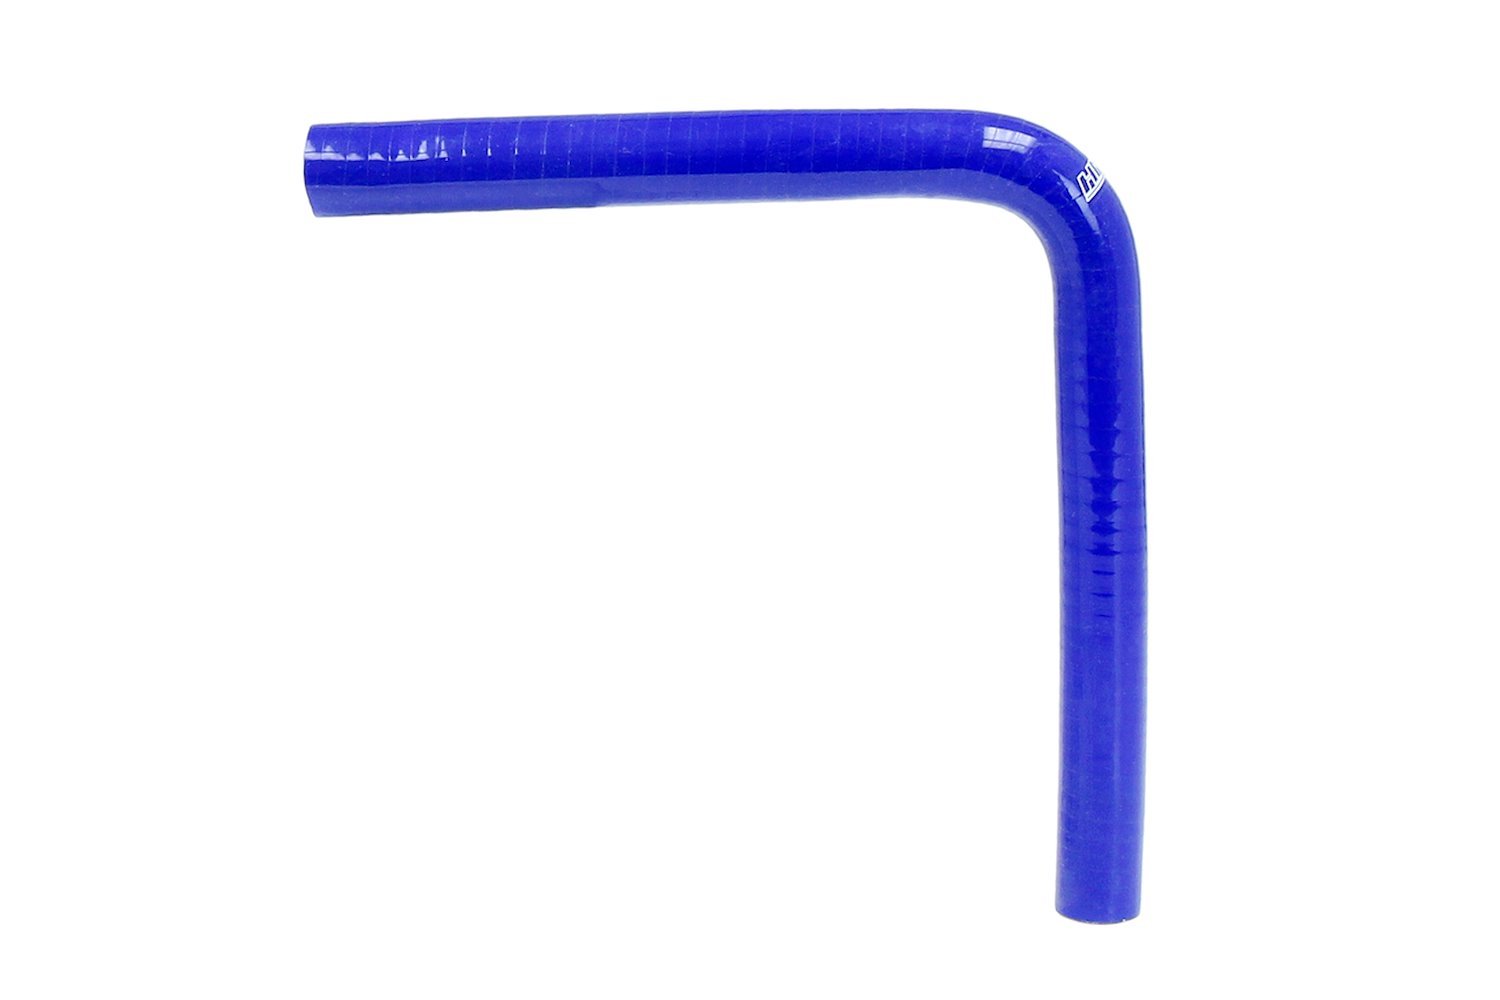 HTSEC90-044-BLUE Silicone 90-Degree Elbow Coupler Hose, High-Temp 4-Ply Reinforced, 7/16 in. ID, Blue